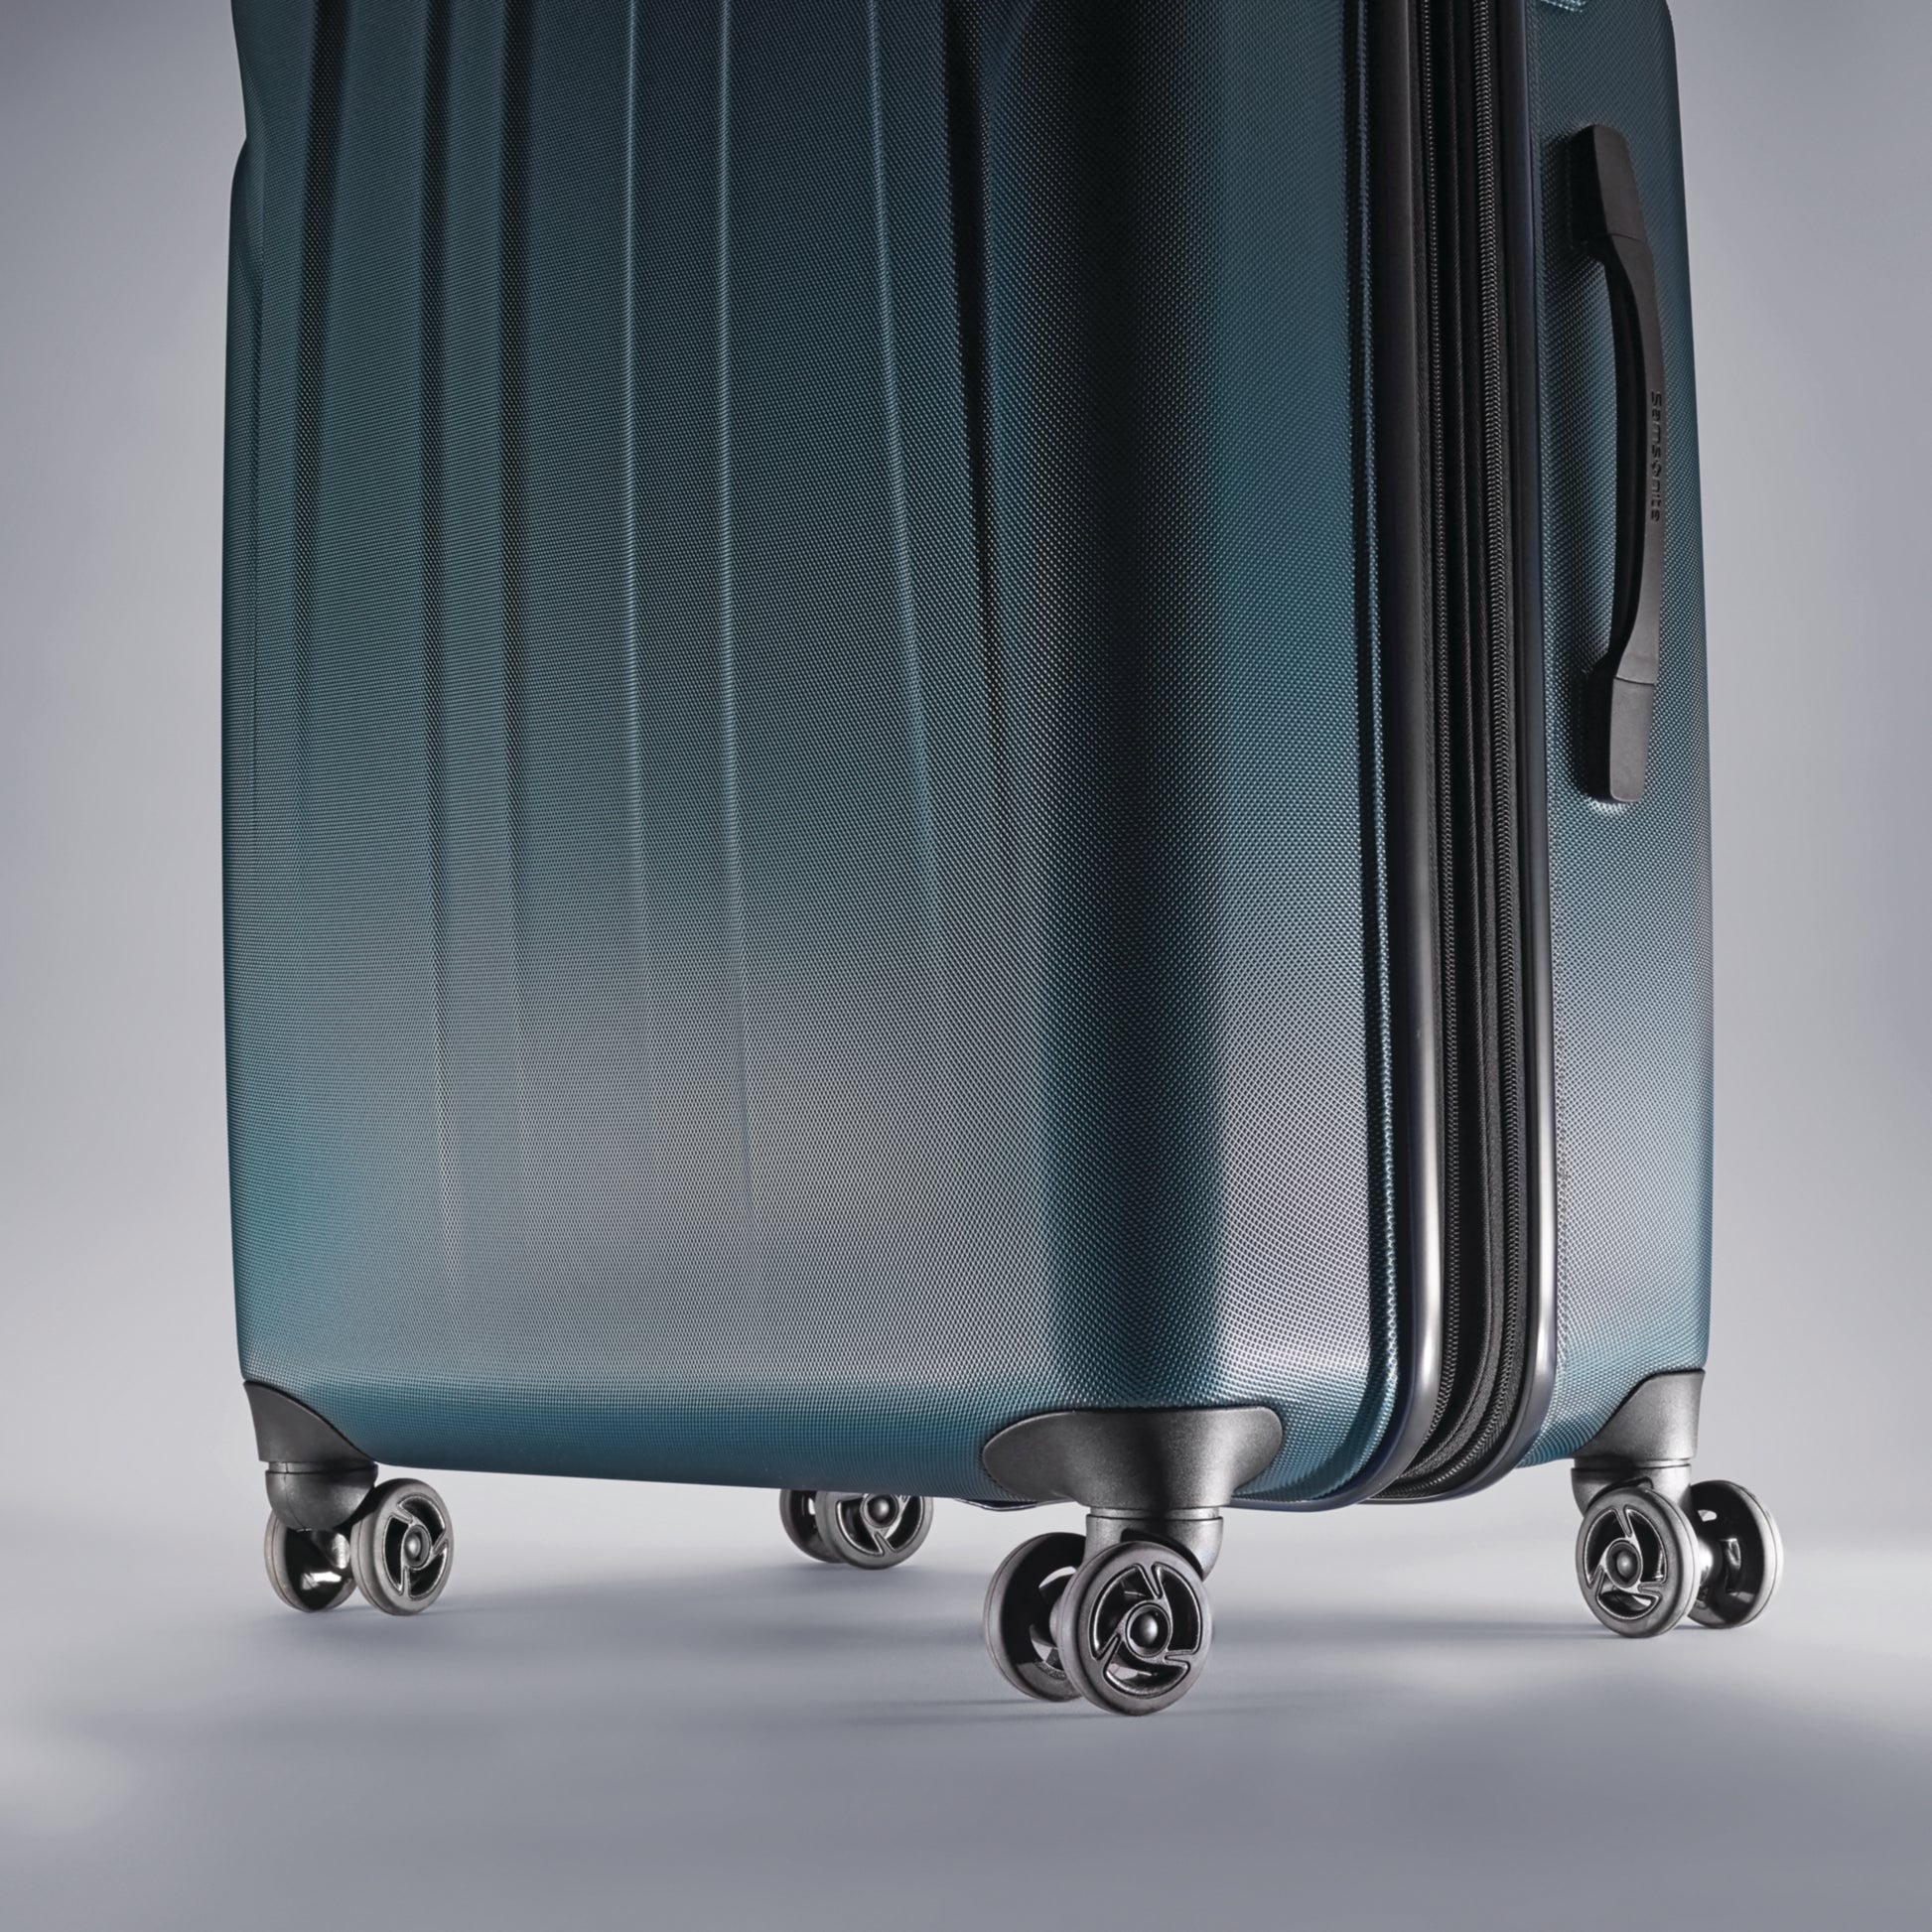 Samsonite Xion Polycarbonate Expandable Spinner Large Luggage